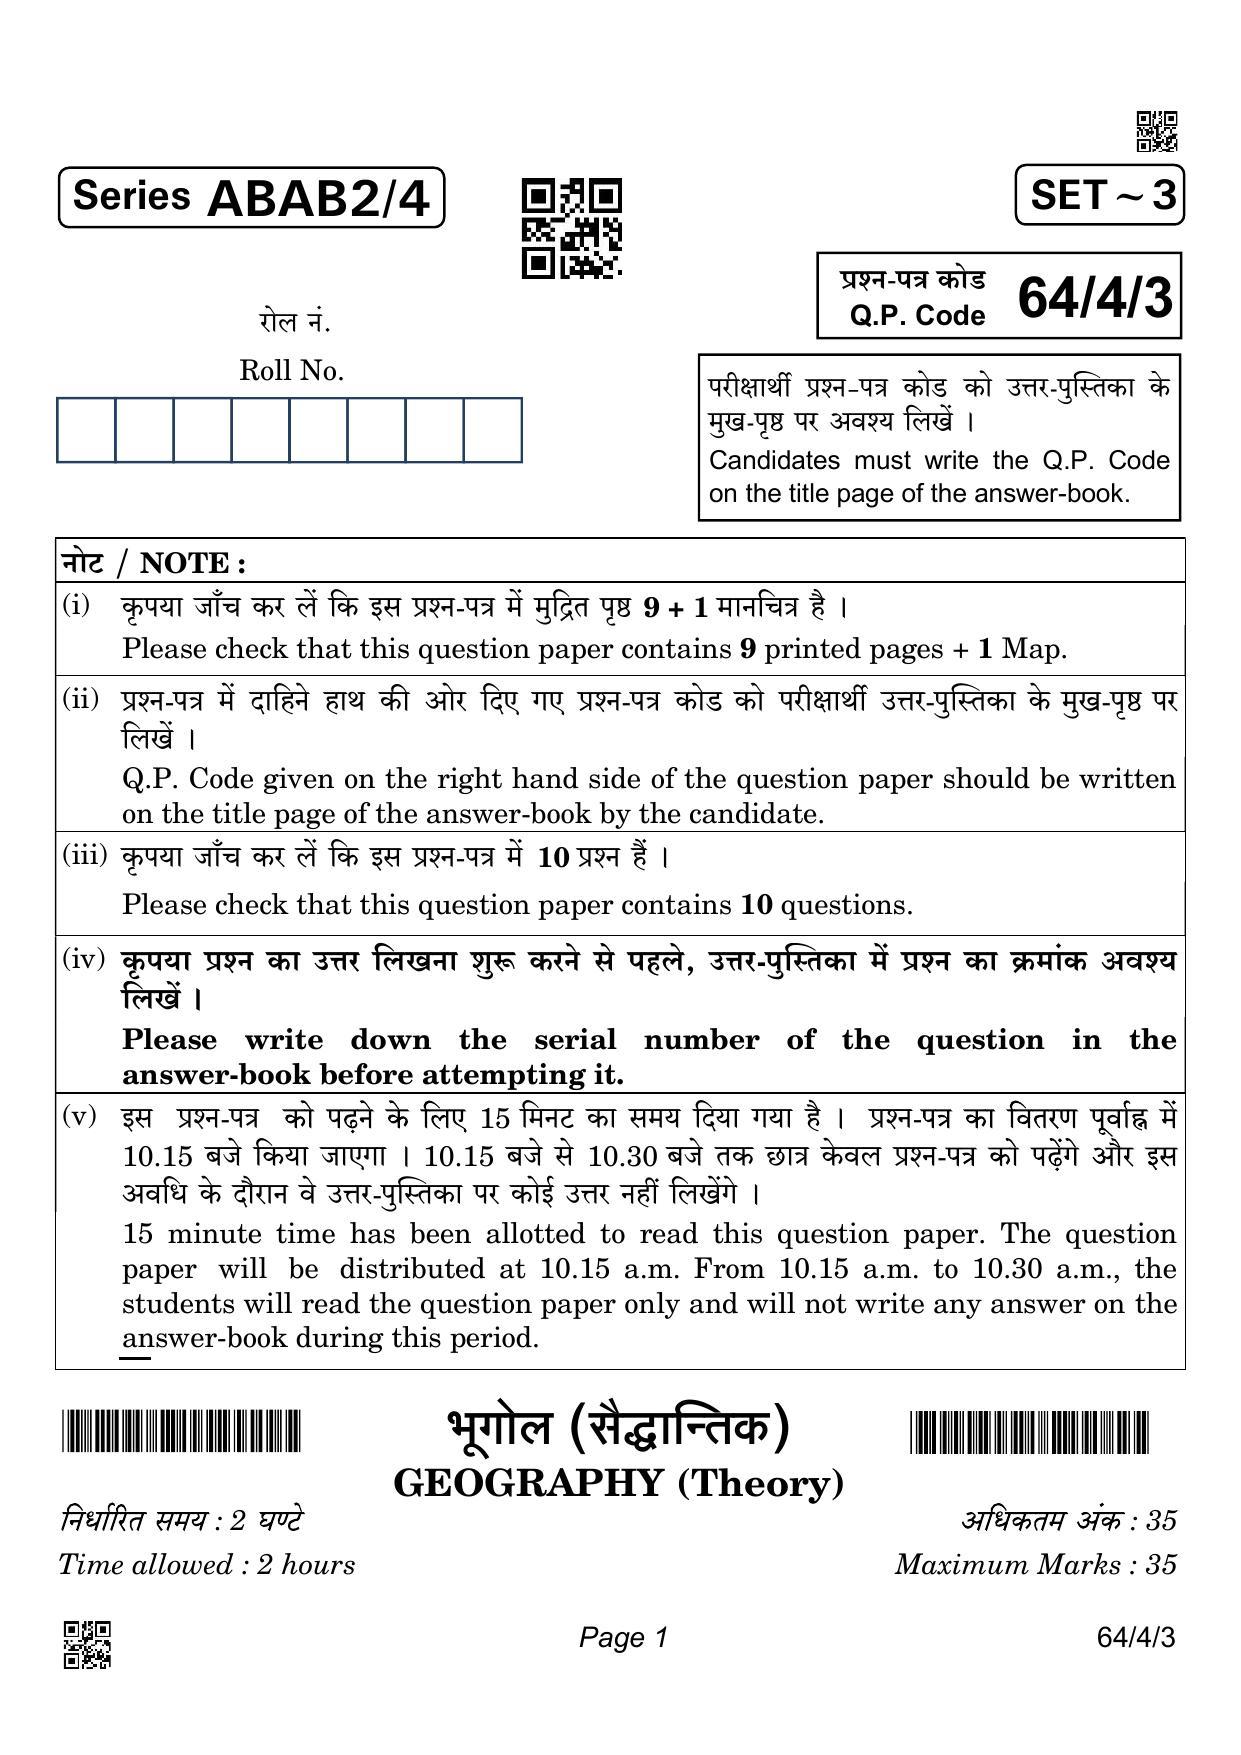 CBSE Class 12 64-4-3 Geography 2022 Question Paper - Page 1